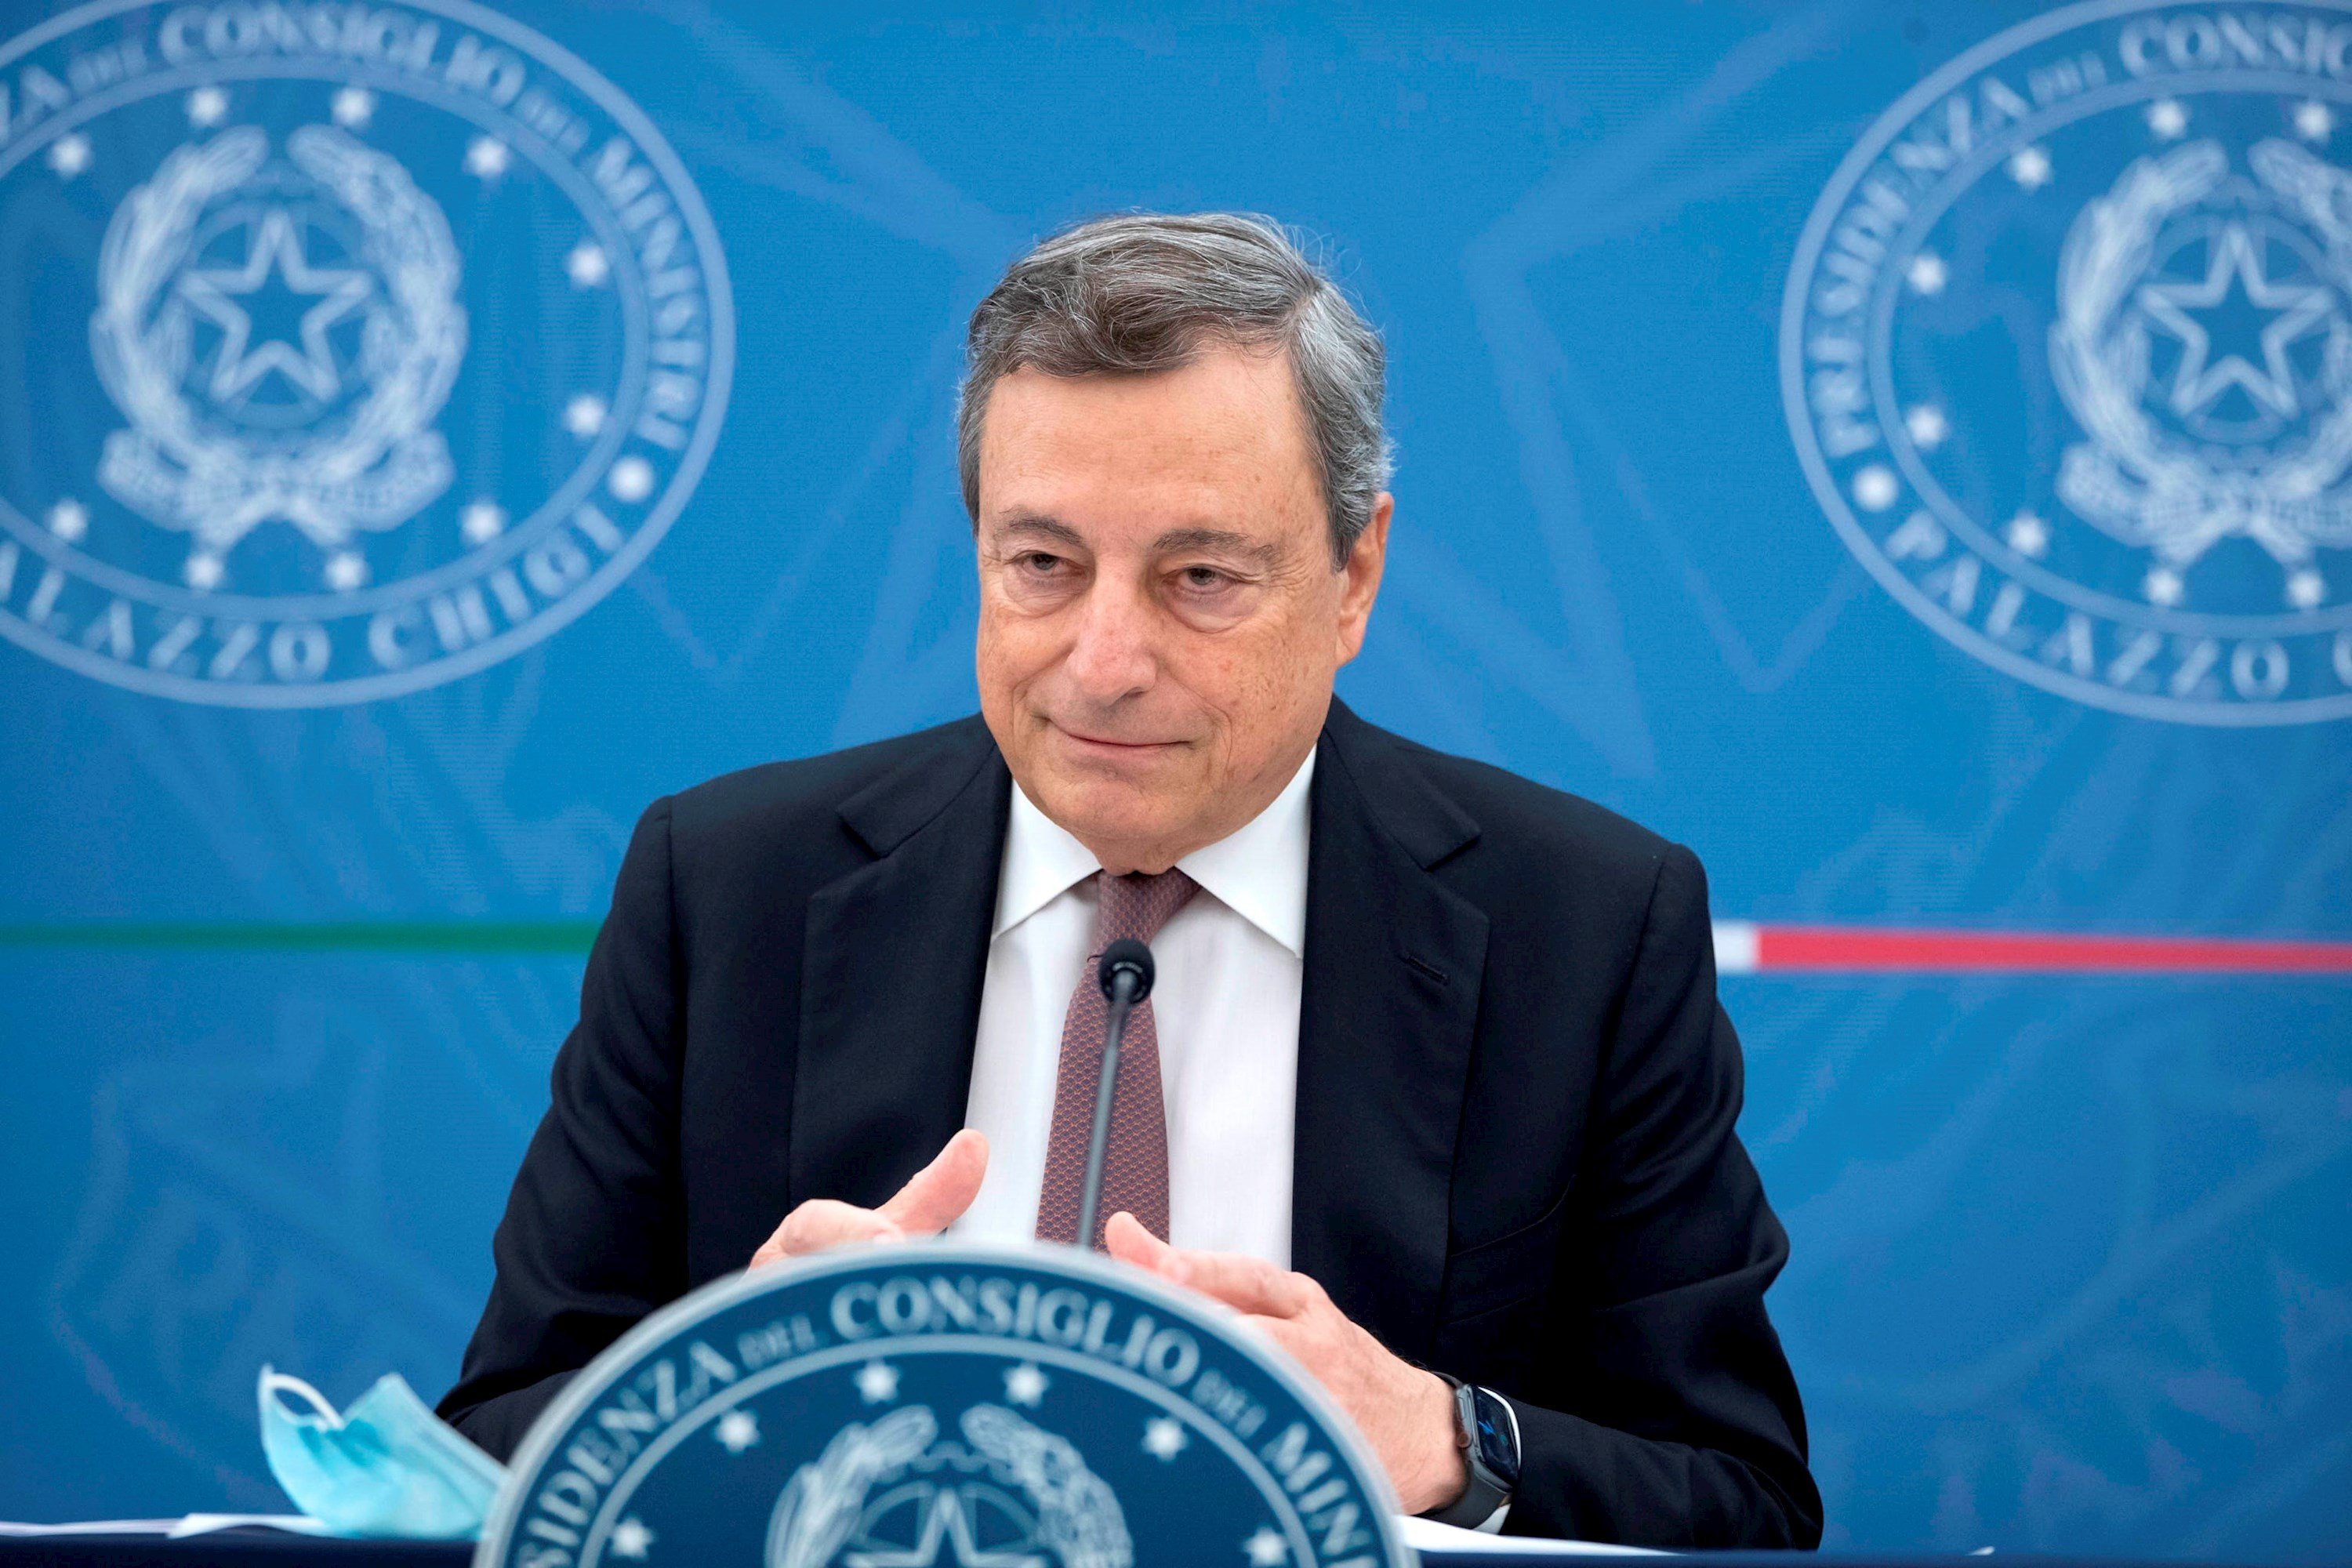 Draghi: Operation against Puigdemont was "carried out by police and judges"